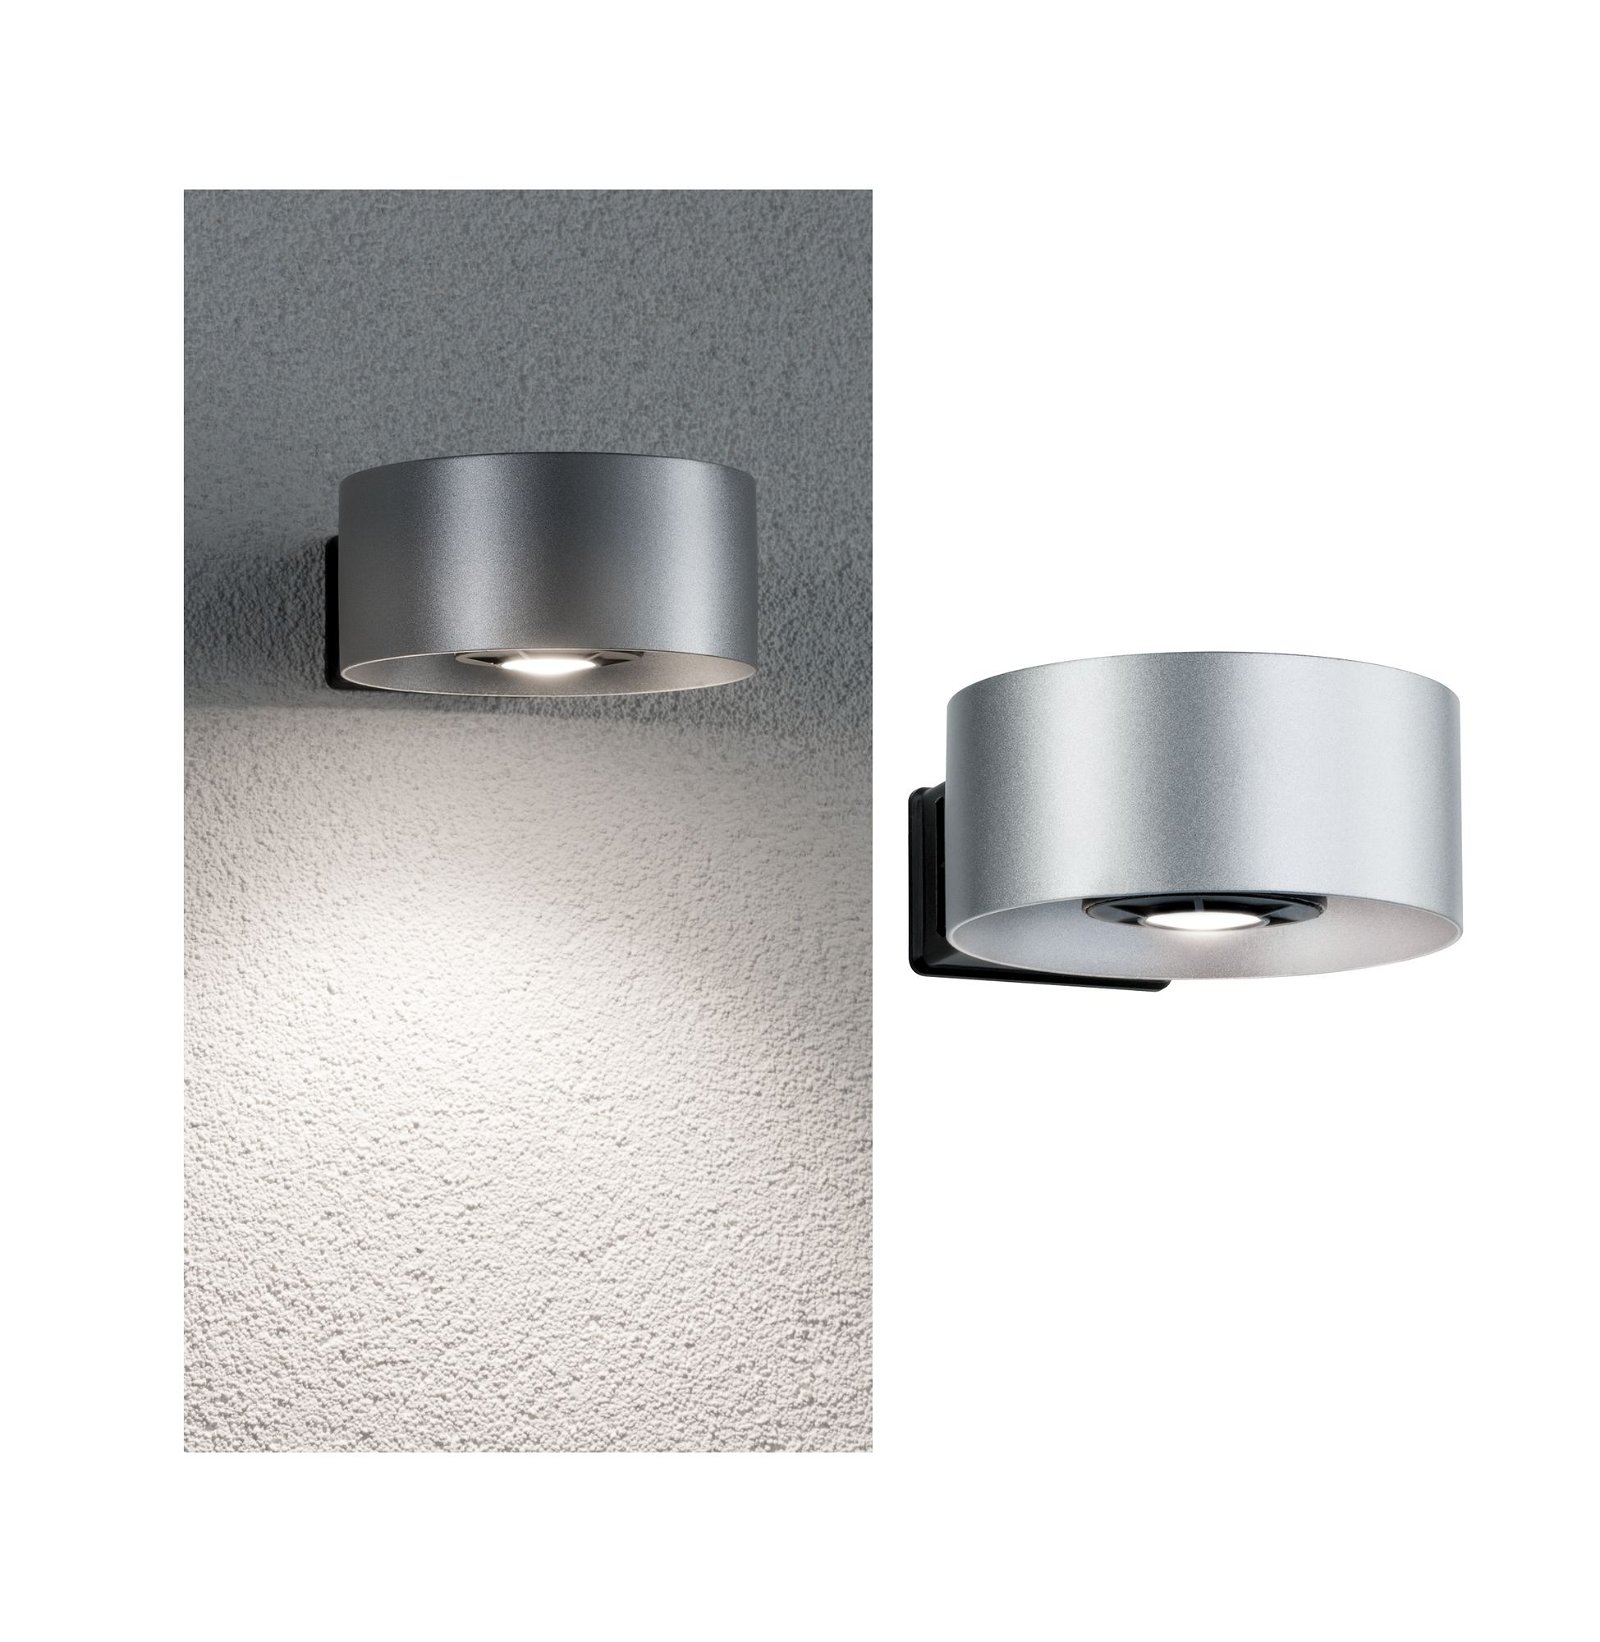 House wall luminaire Cone IP44 4,000 K 8 W silver/ Anthracite